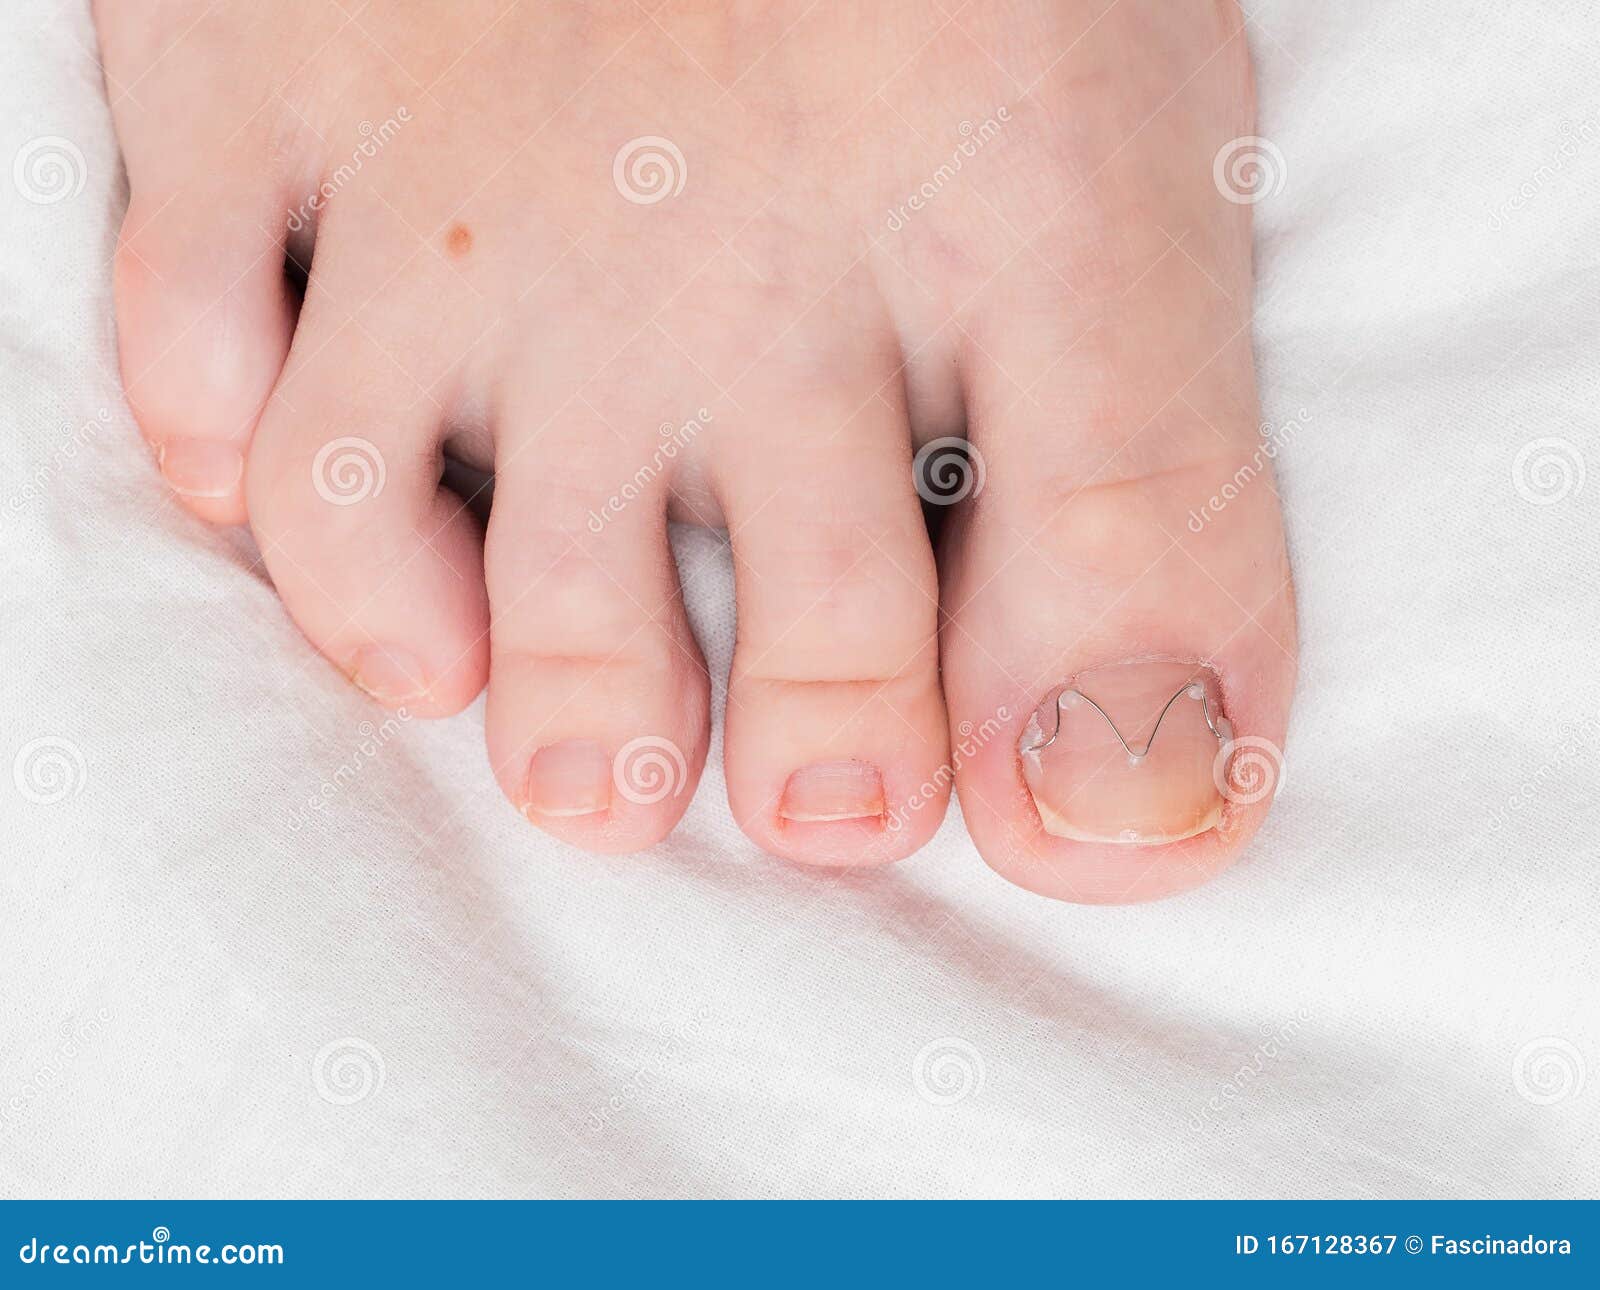 How Long Does It Take for a Toenail to Grow Back?